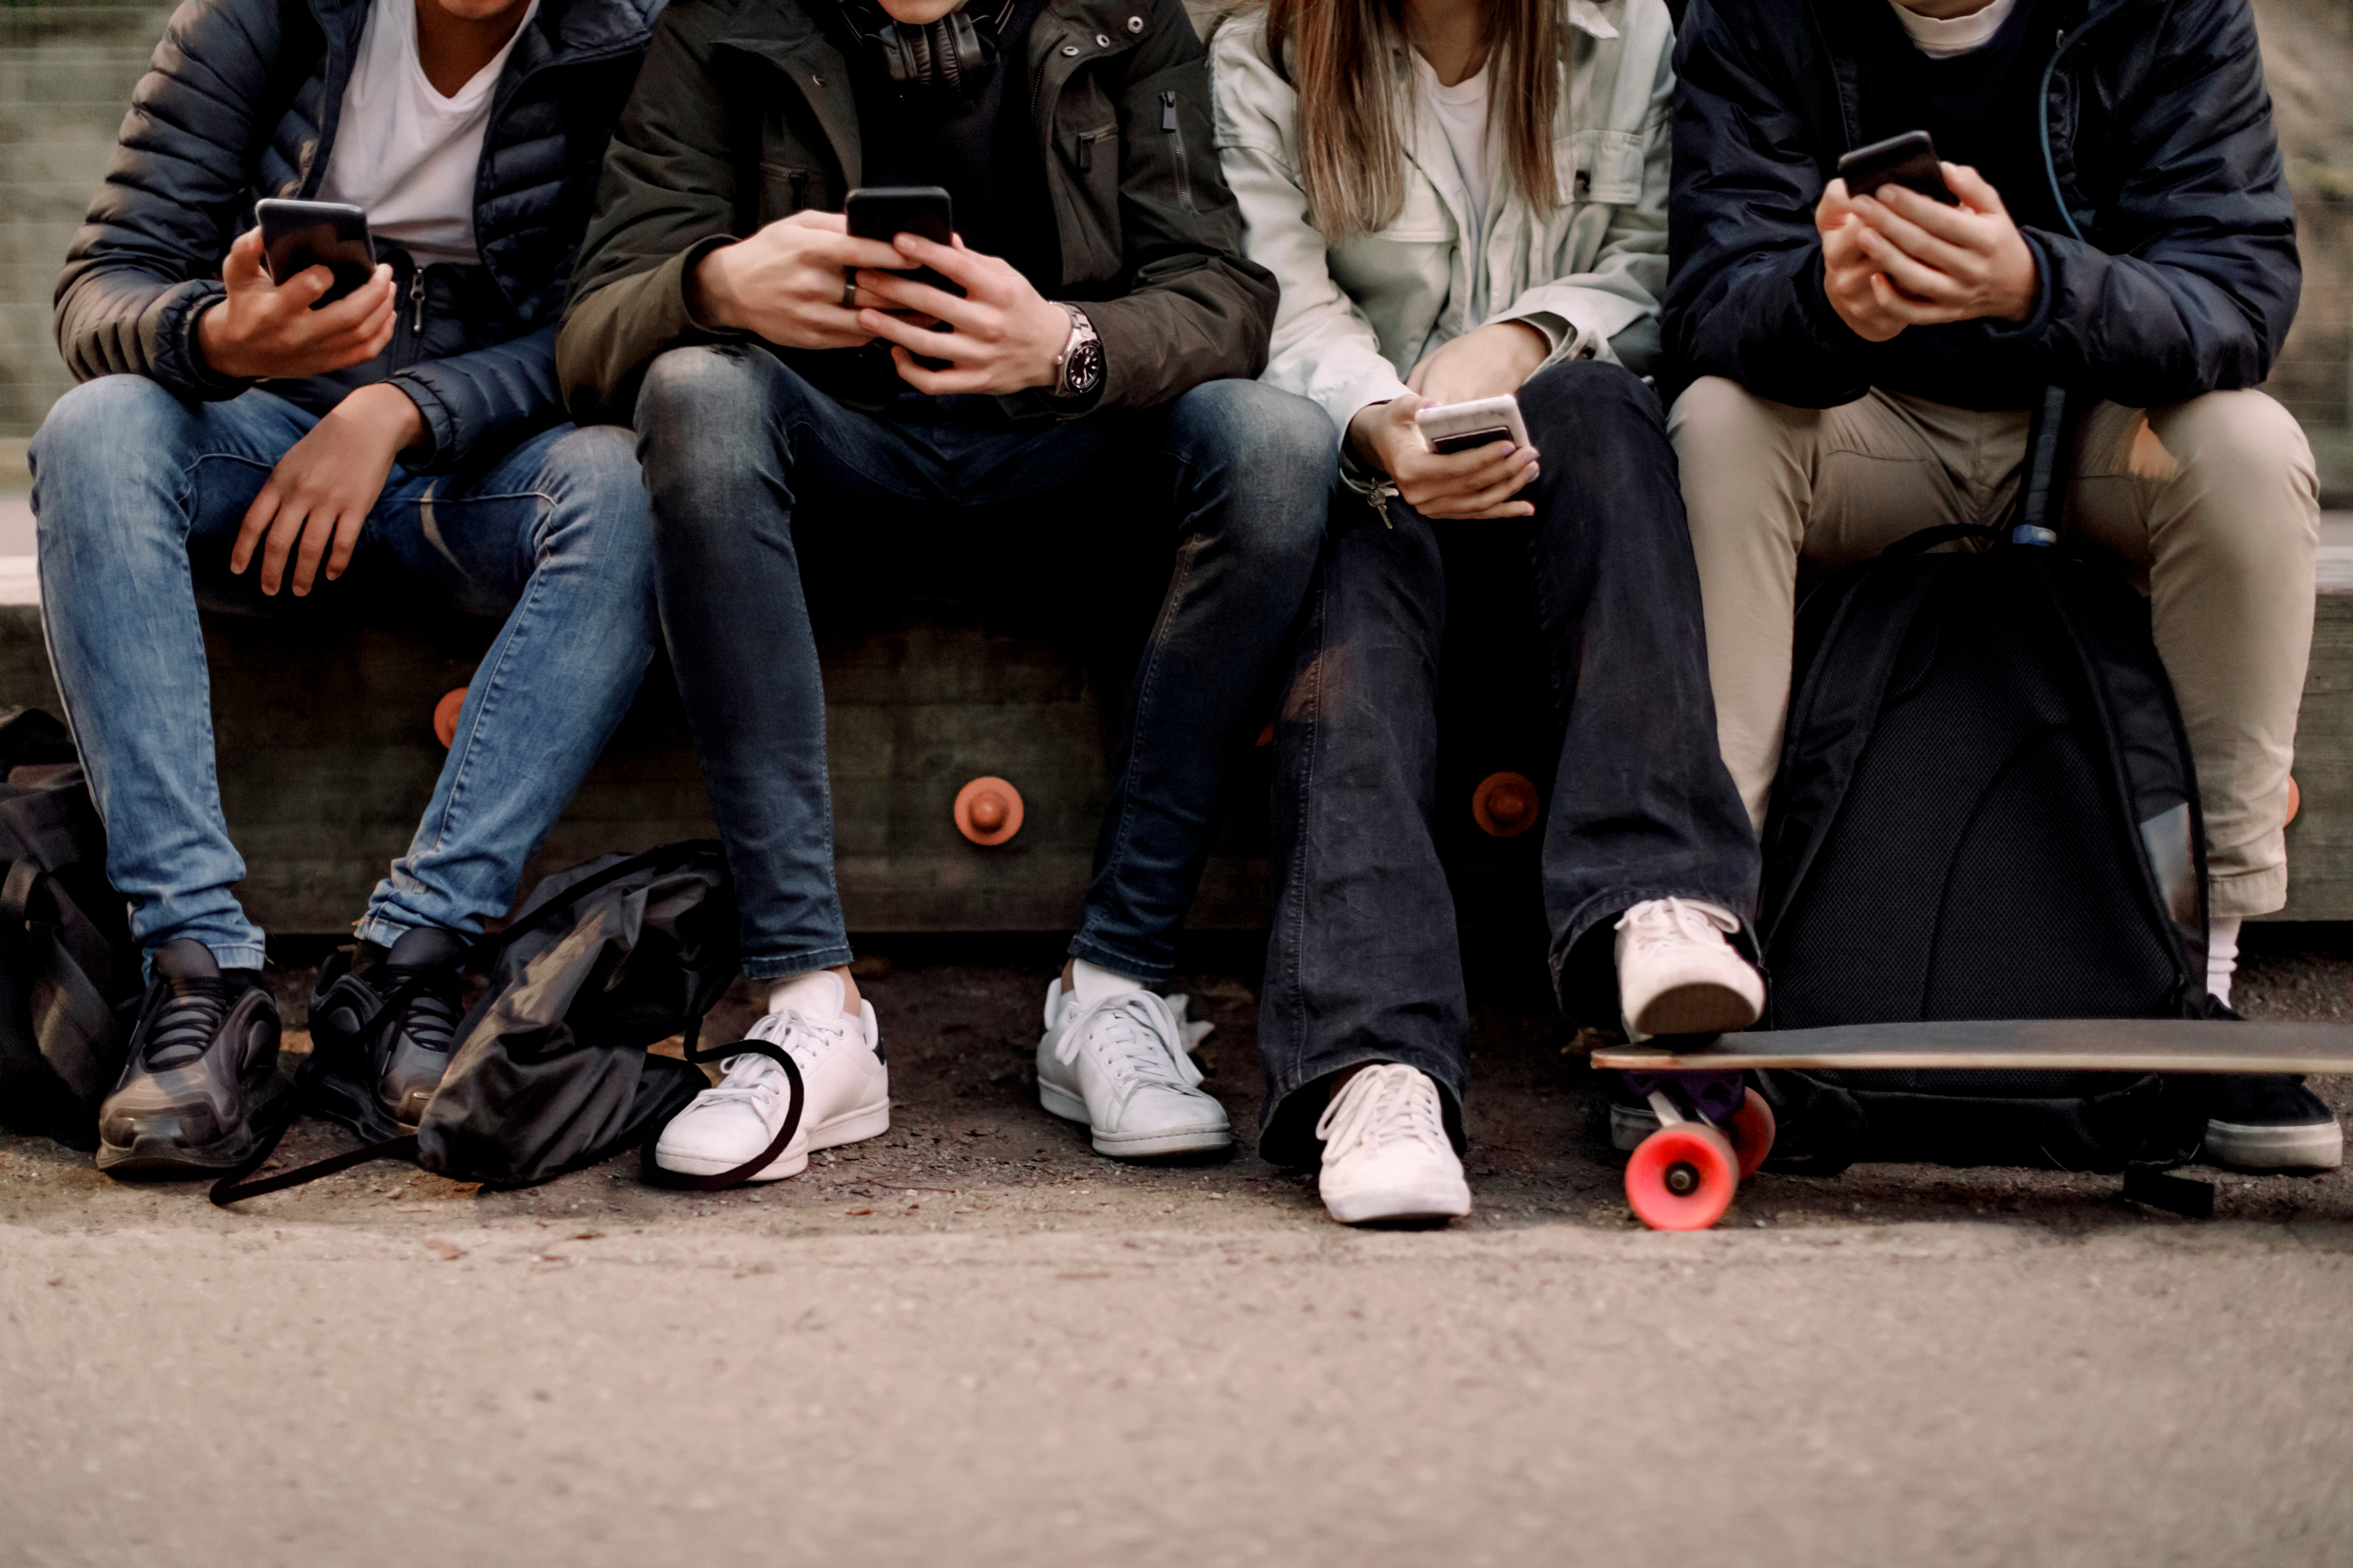 Four individuals seated on a bench, each looking at their smartphones, with a skateboard visible